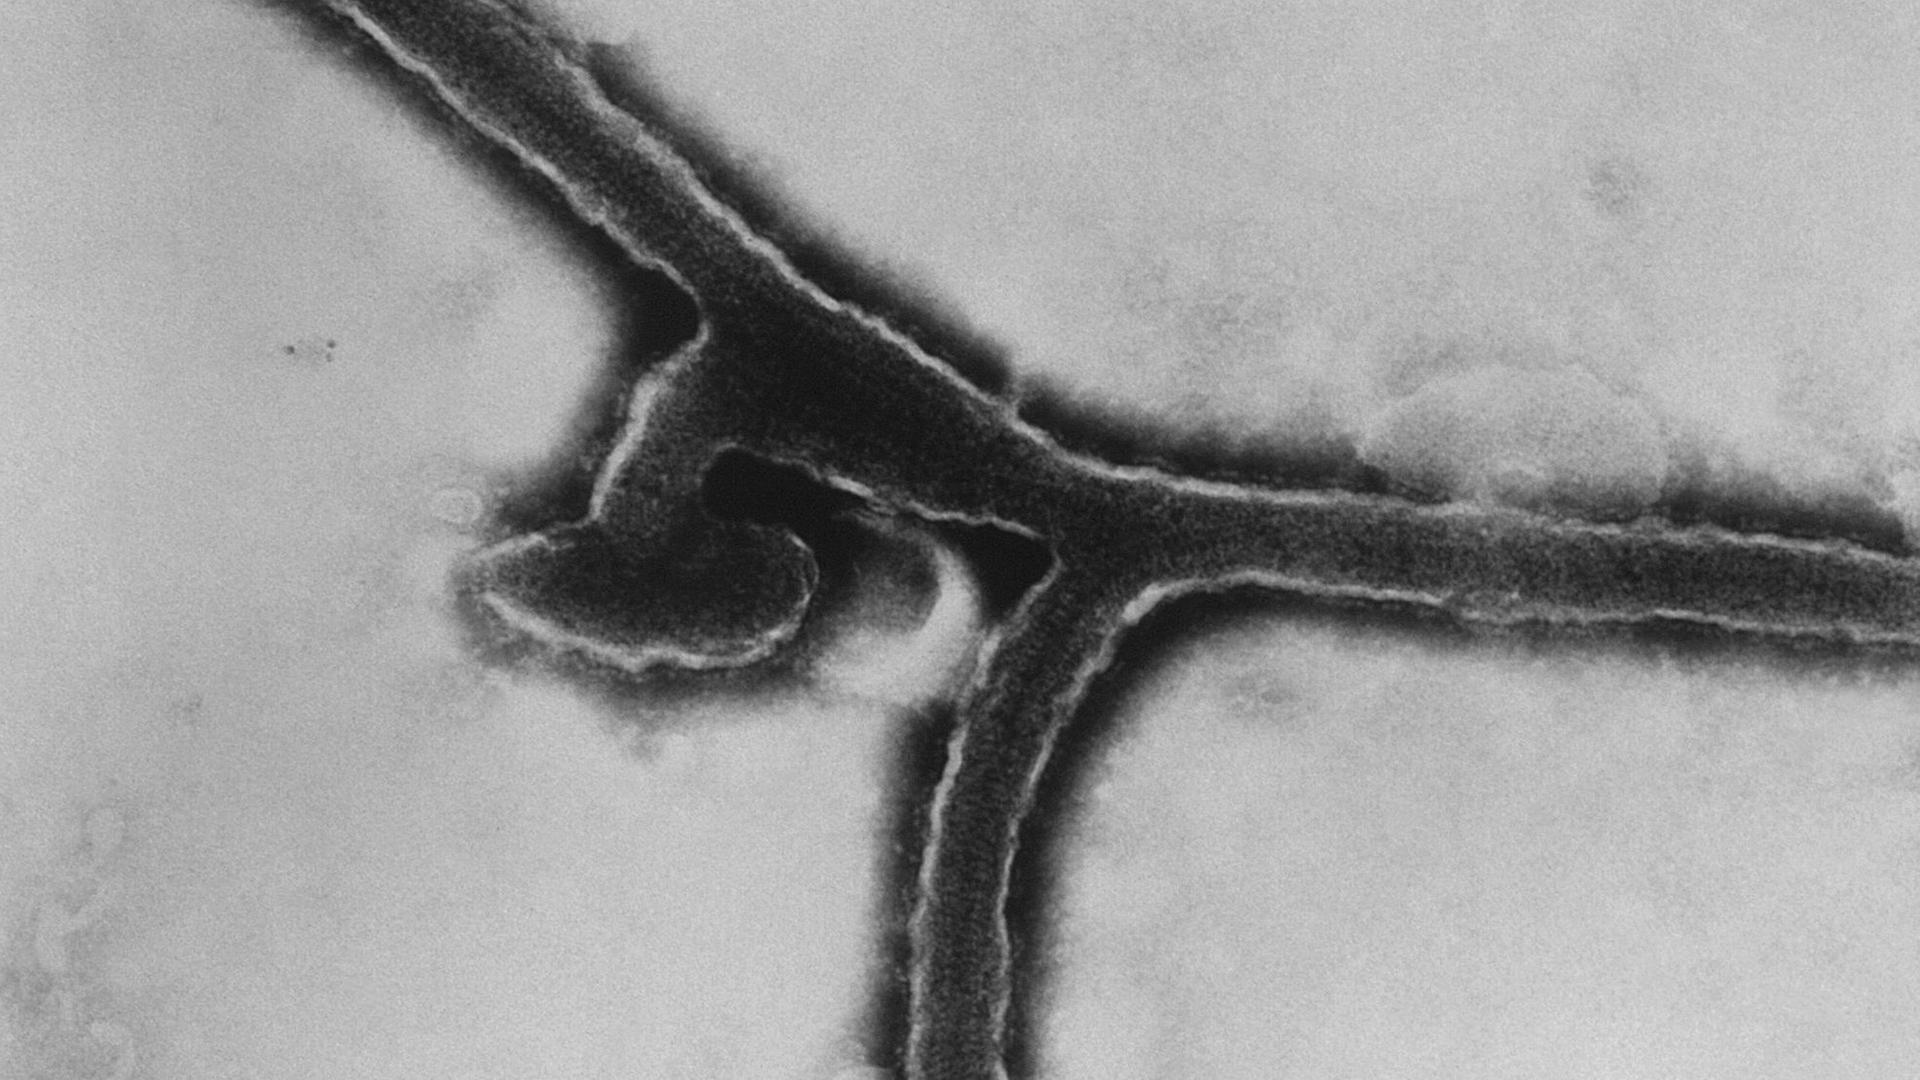 This transmission electron micrograph (TEM) revealed some of the ultrastructural morphology exhibited by the Marburg virus, the cause of Marburg hemorrhagic fever. Marburg hemorrhagic fever is a rare, severe type of hemorrhagic fever which affects both humans and non-human primates.